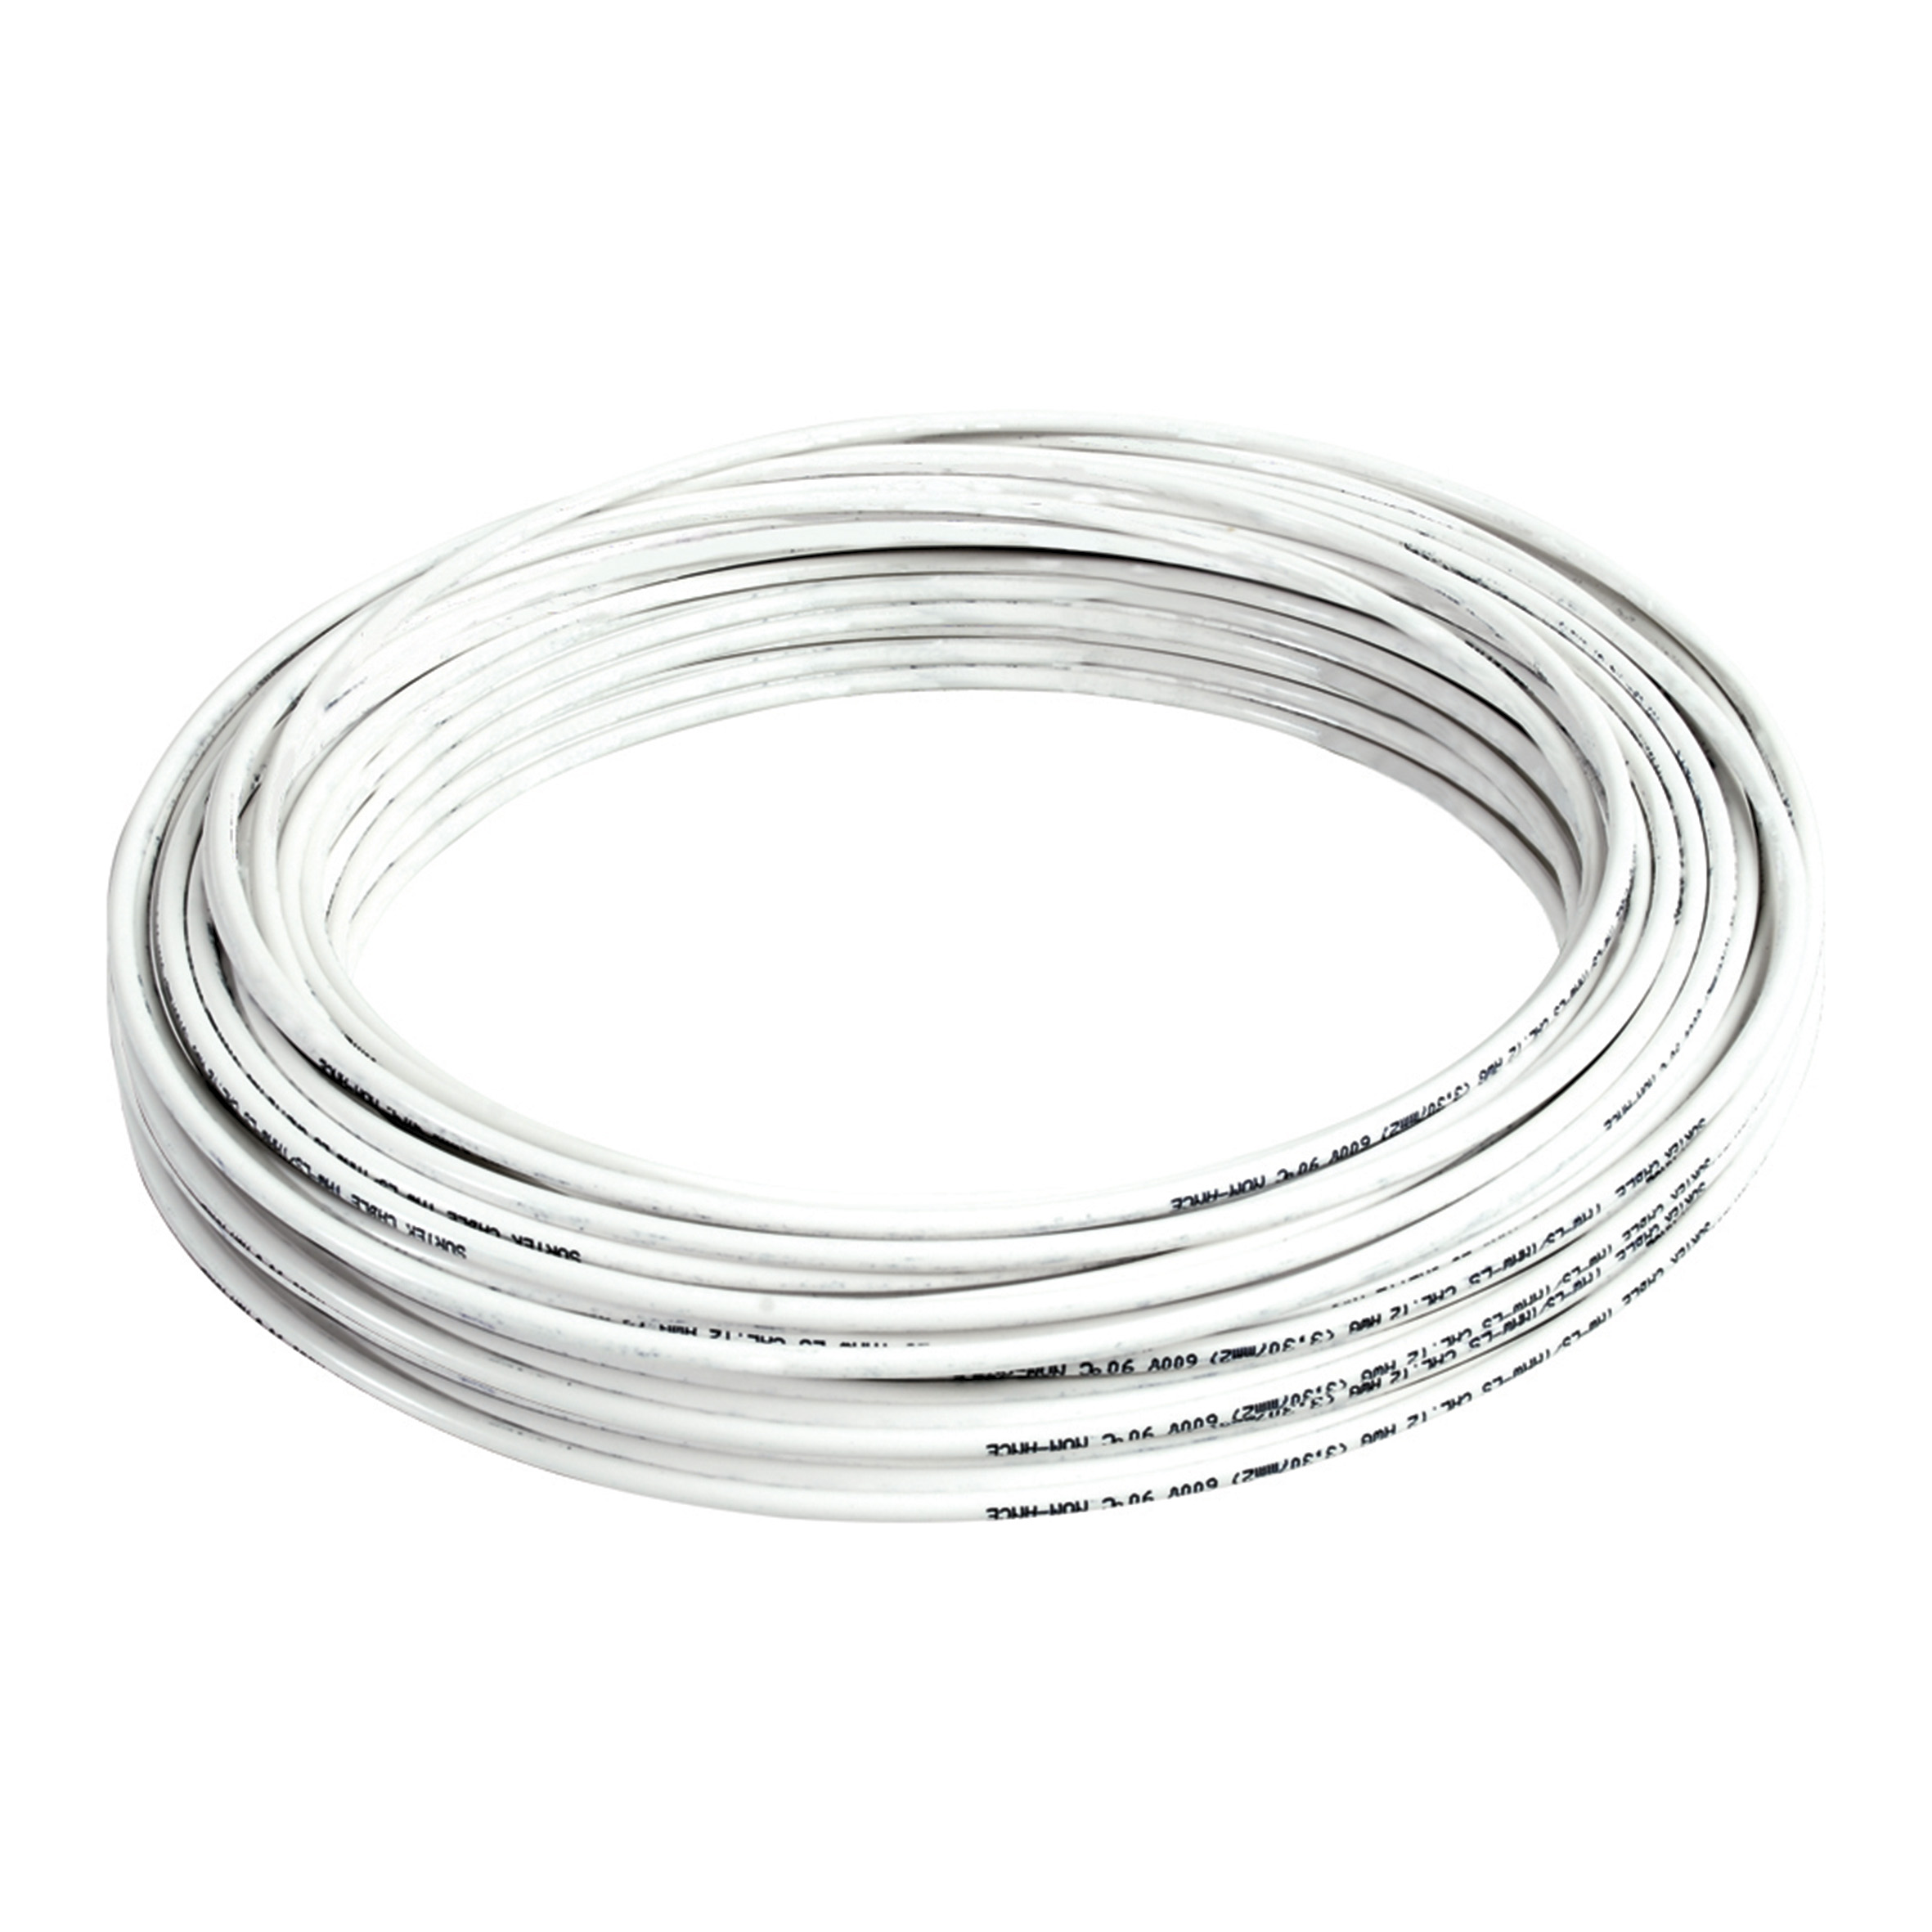 Cable eléctrico tipo THW-LS / THHW-LS Cal.8 100m blanco